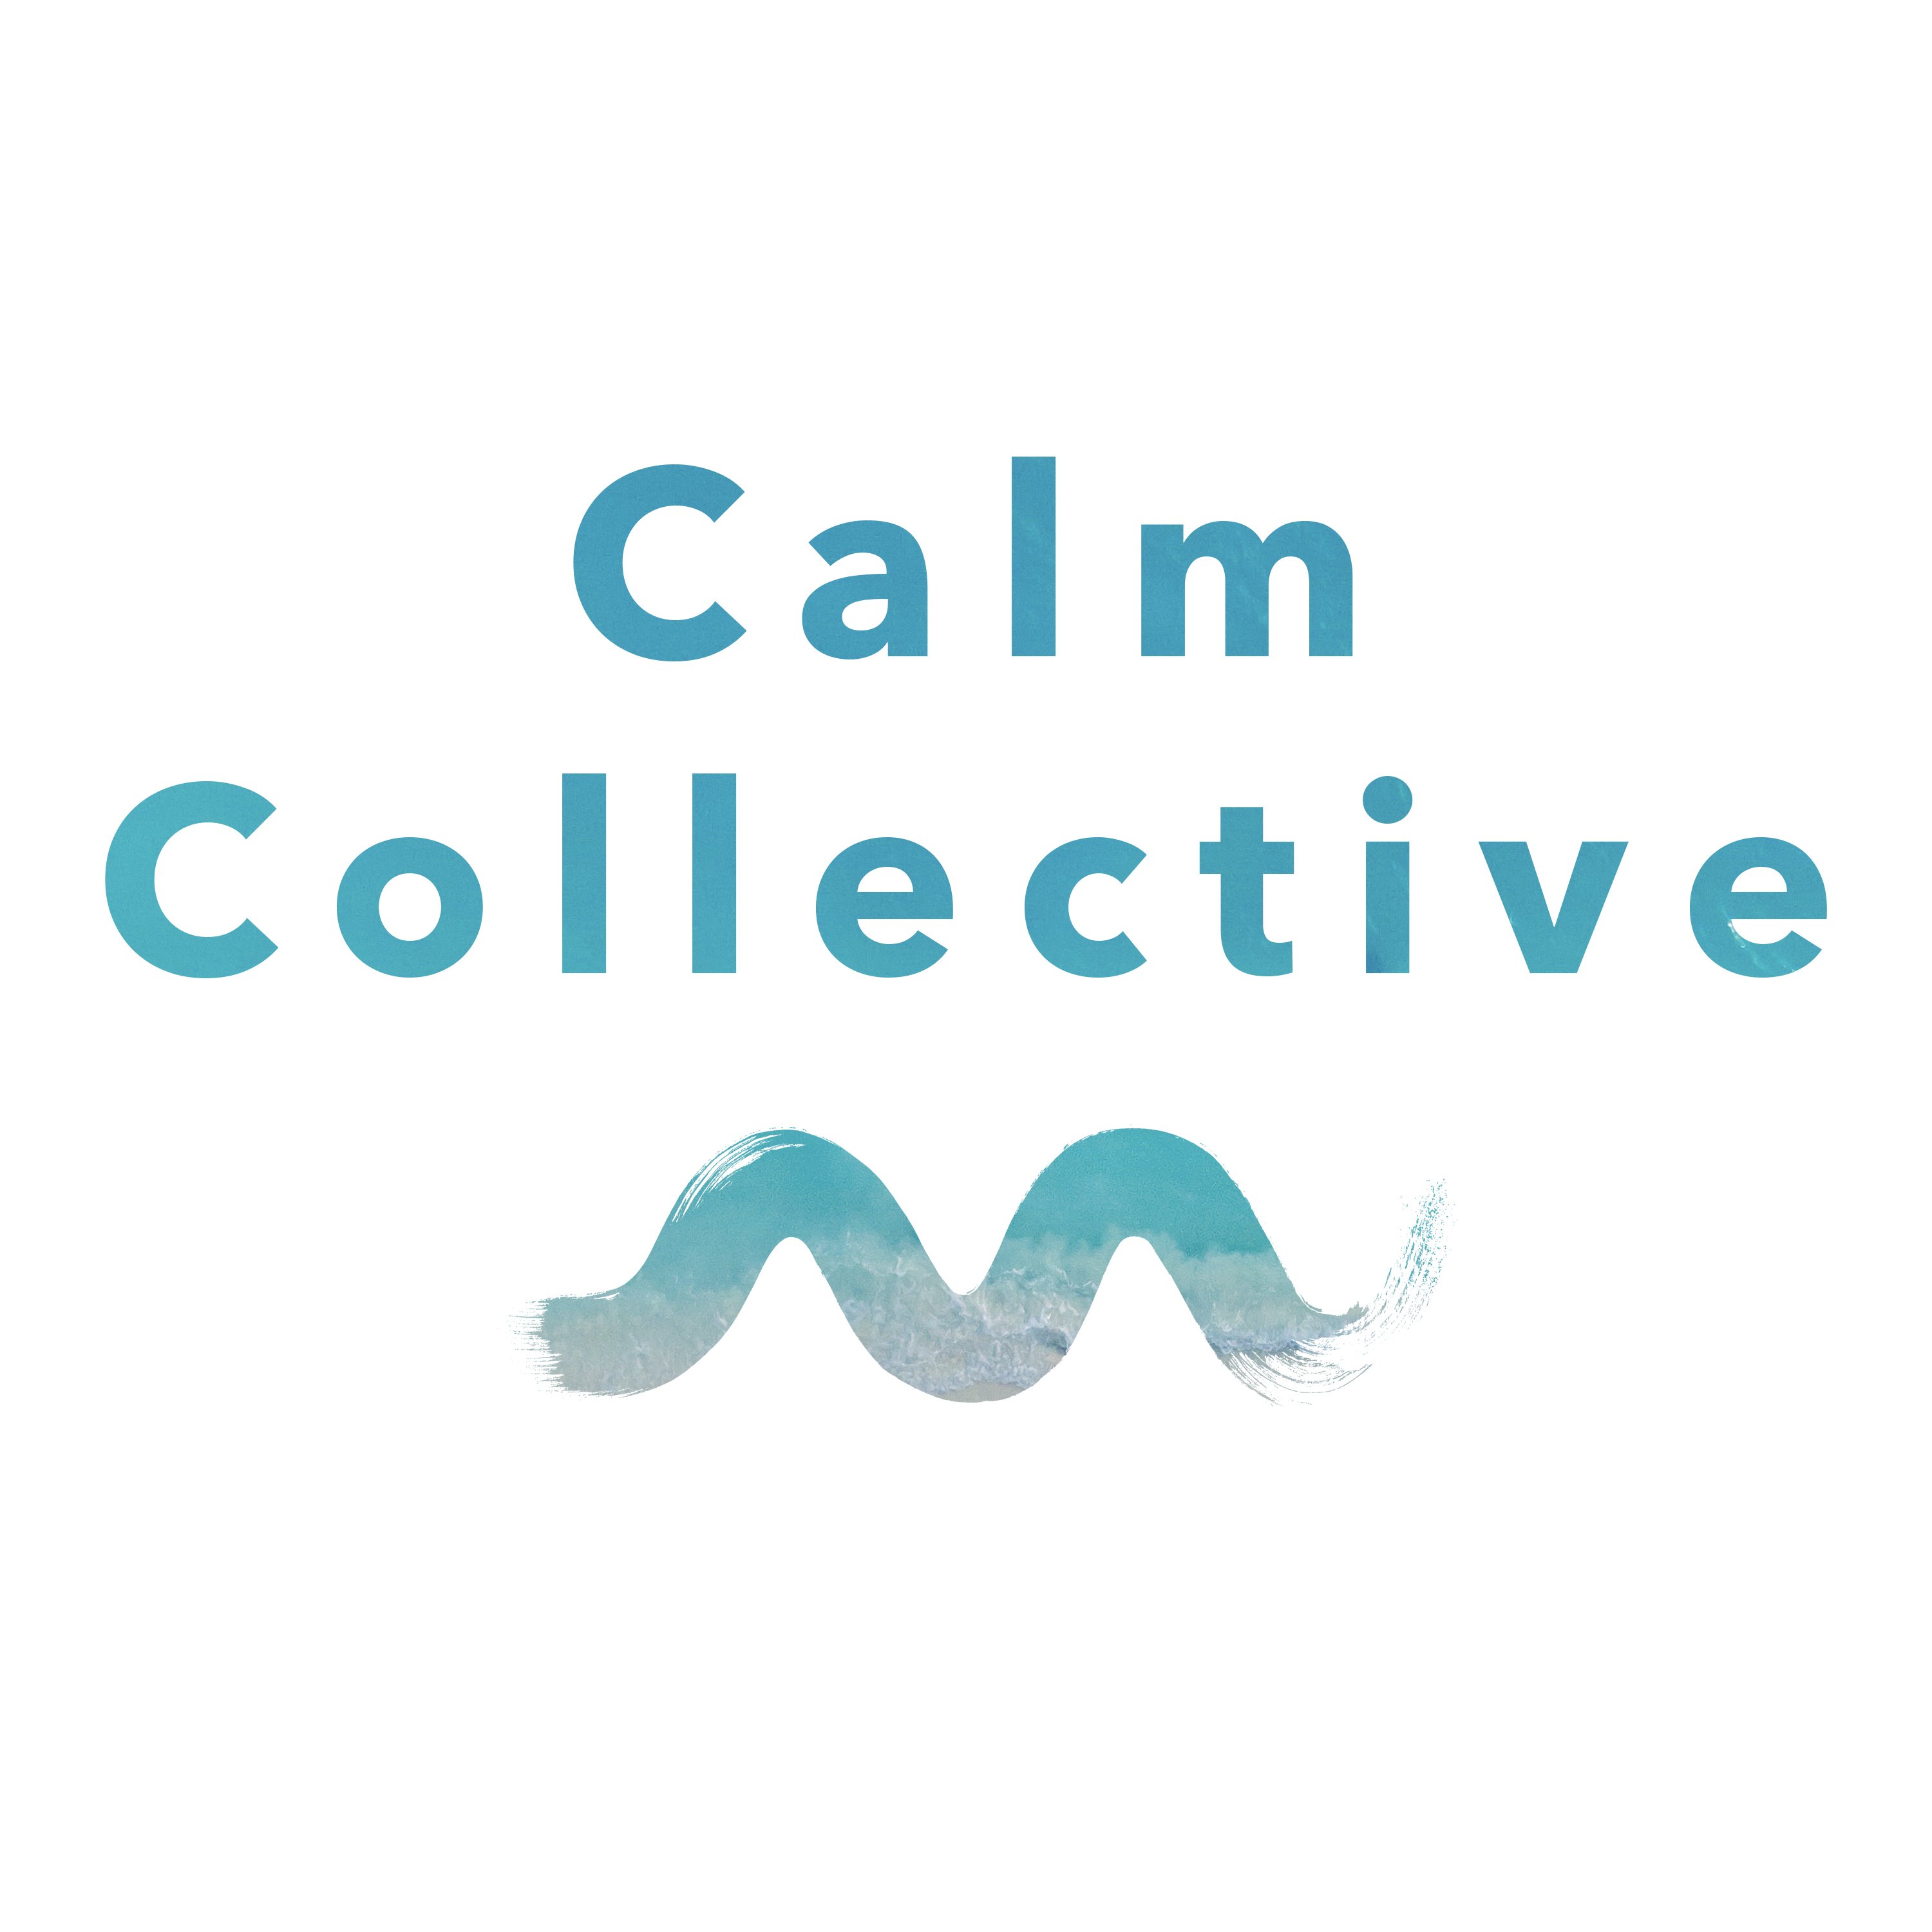 Welcome to Calm Collective. The first mindful music and meditation hub free exclusively via streaming services 💙